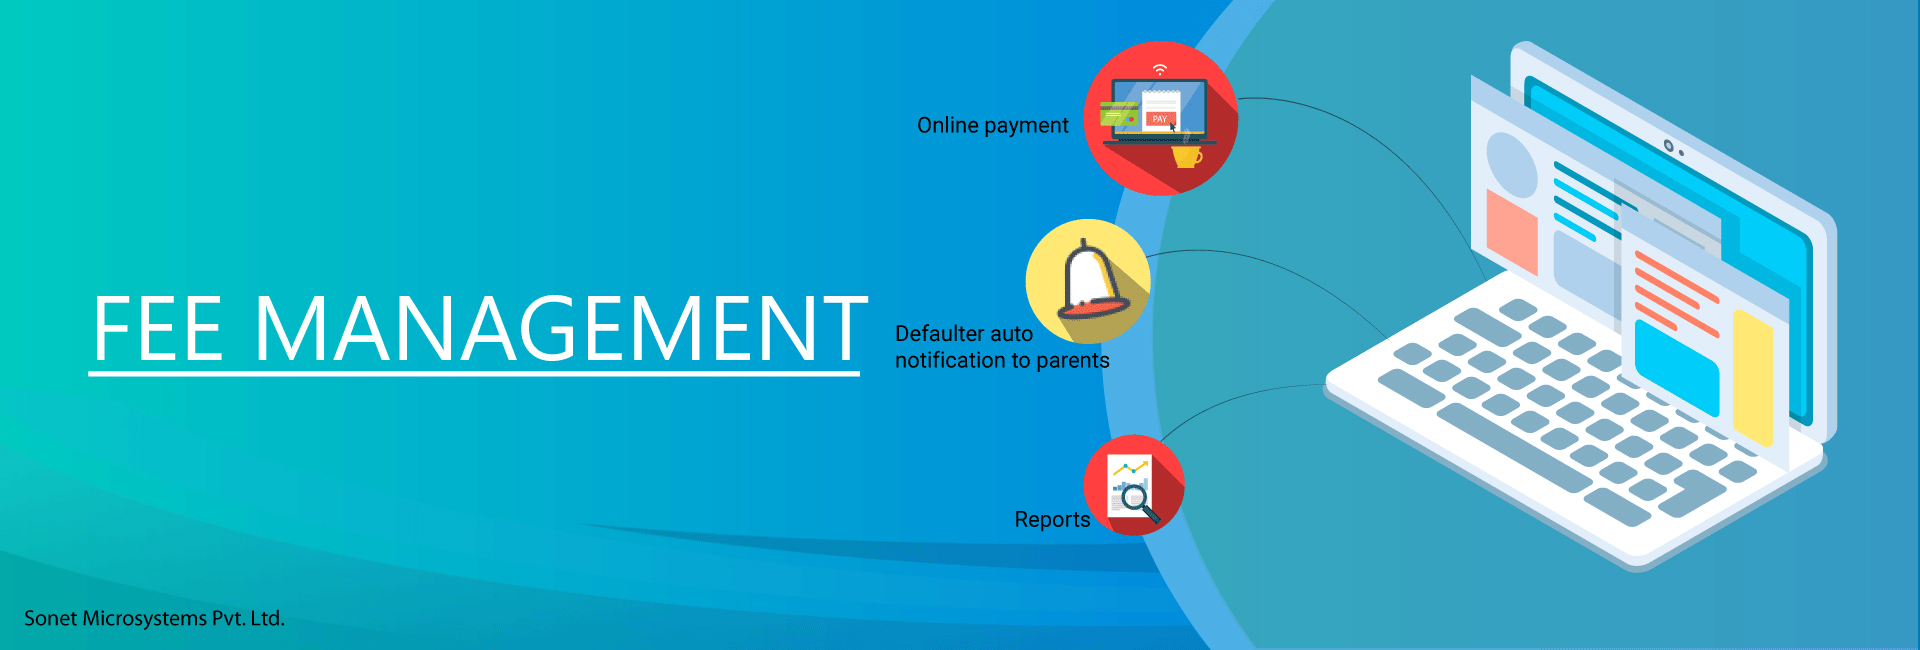 fees management system, school fees management